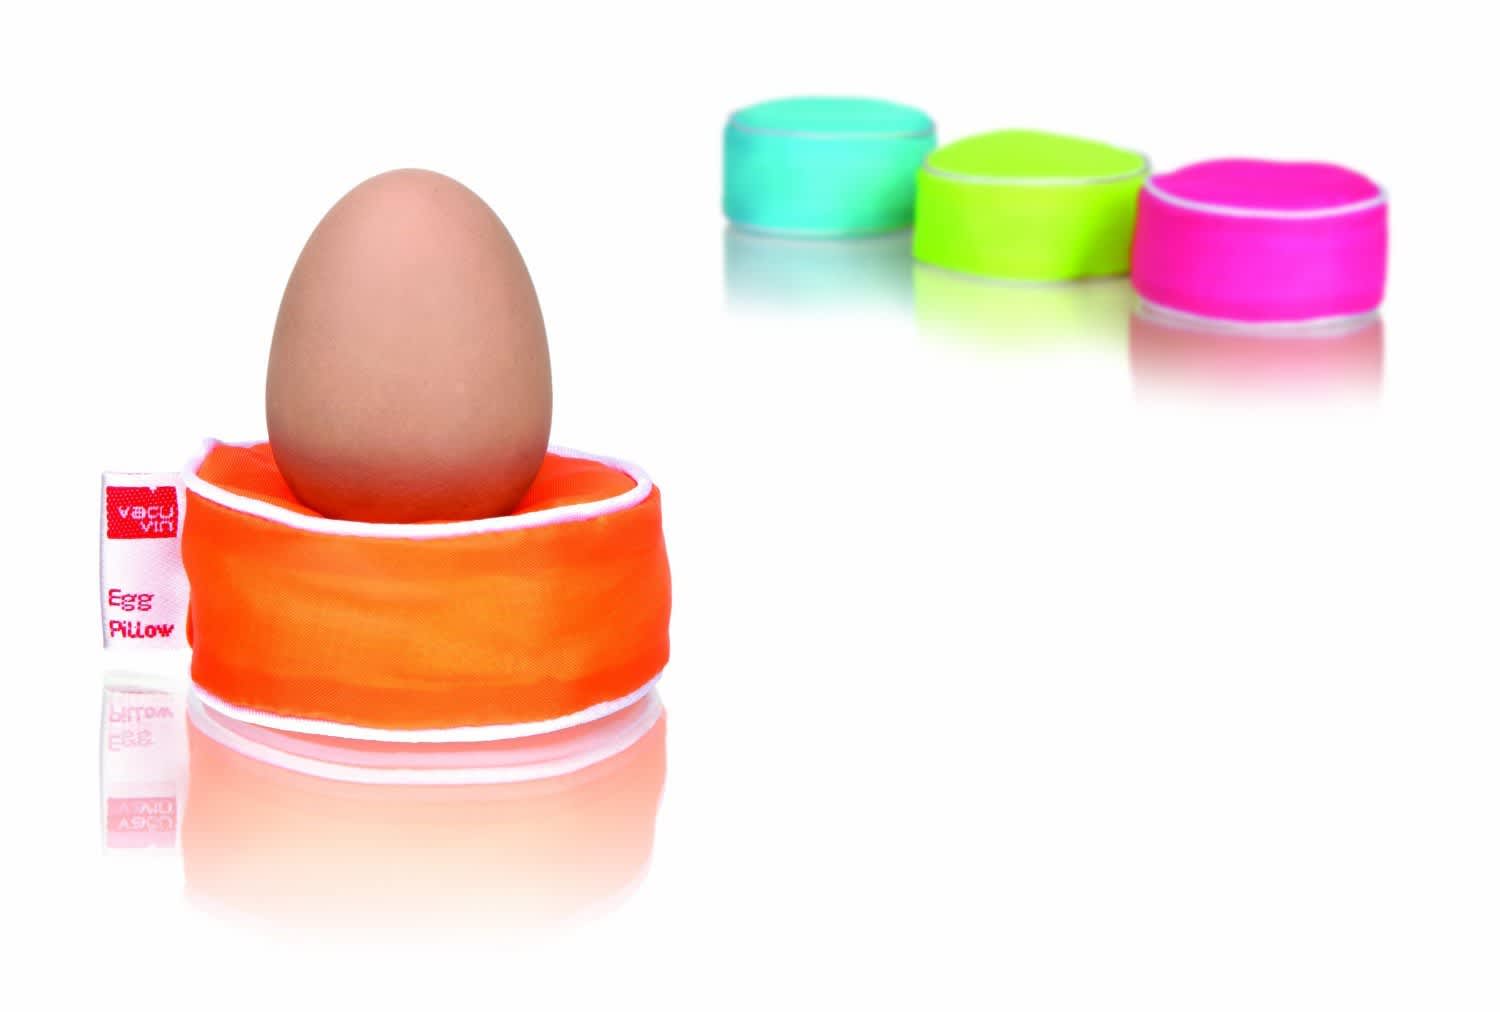 The Most Unnecessary Egg Gadgets Ever